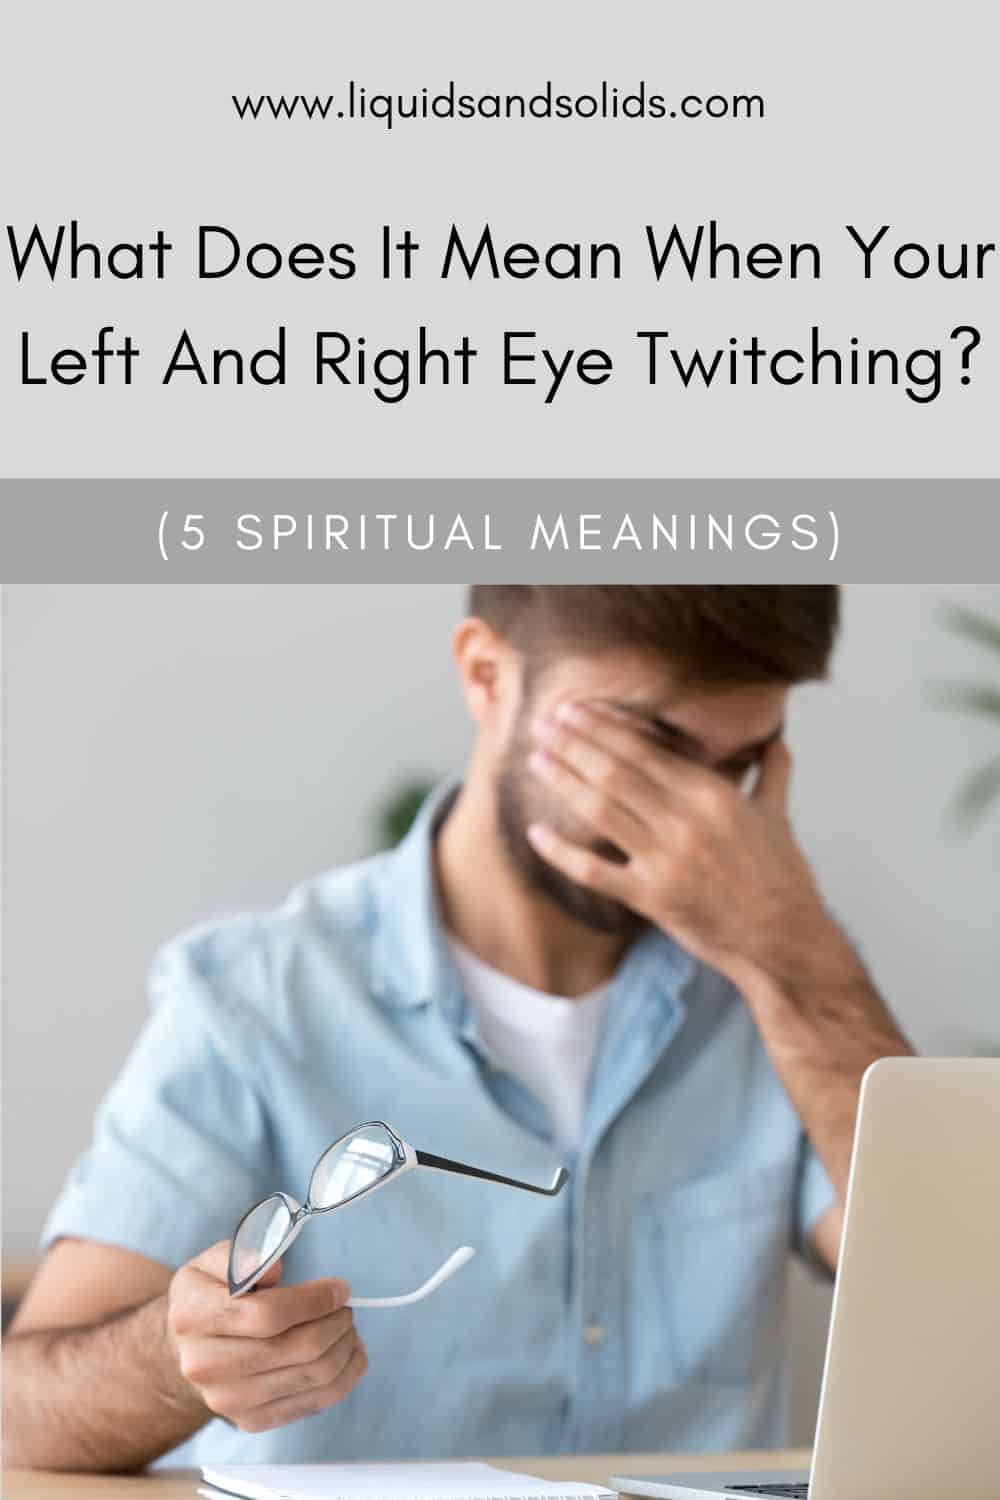 What Does It Mean When Your Left And Right Eye Twitching? (5 Spiritual Meanings)